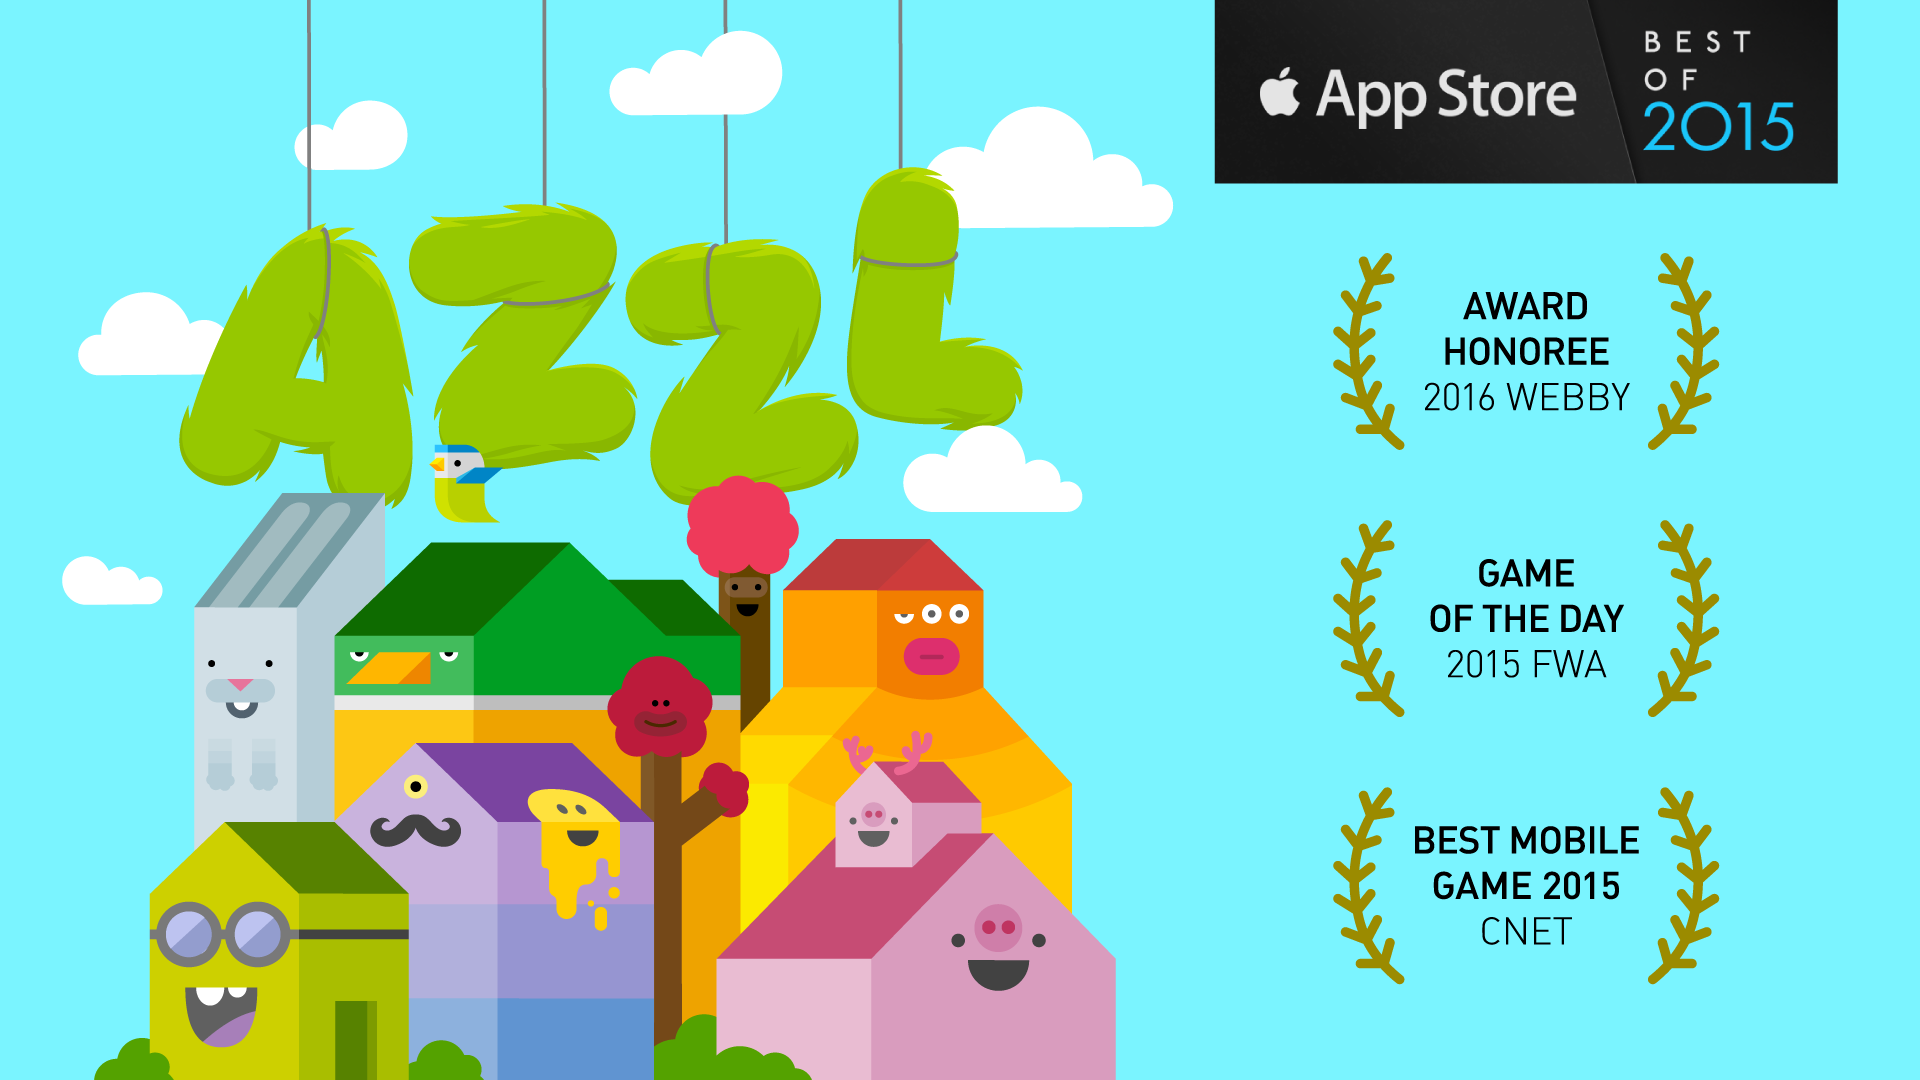 ”Quirky, bubbly, animated puzzler called AZZL”